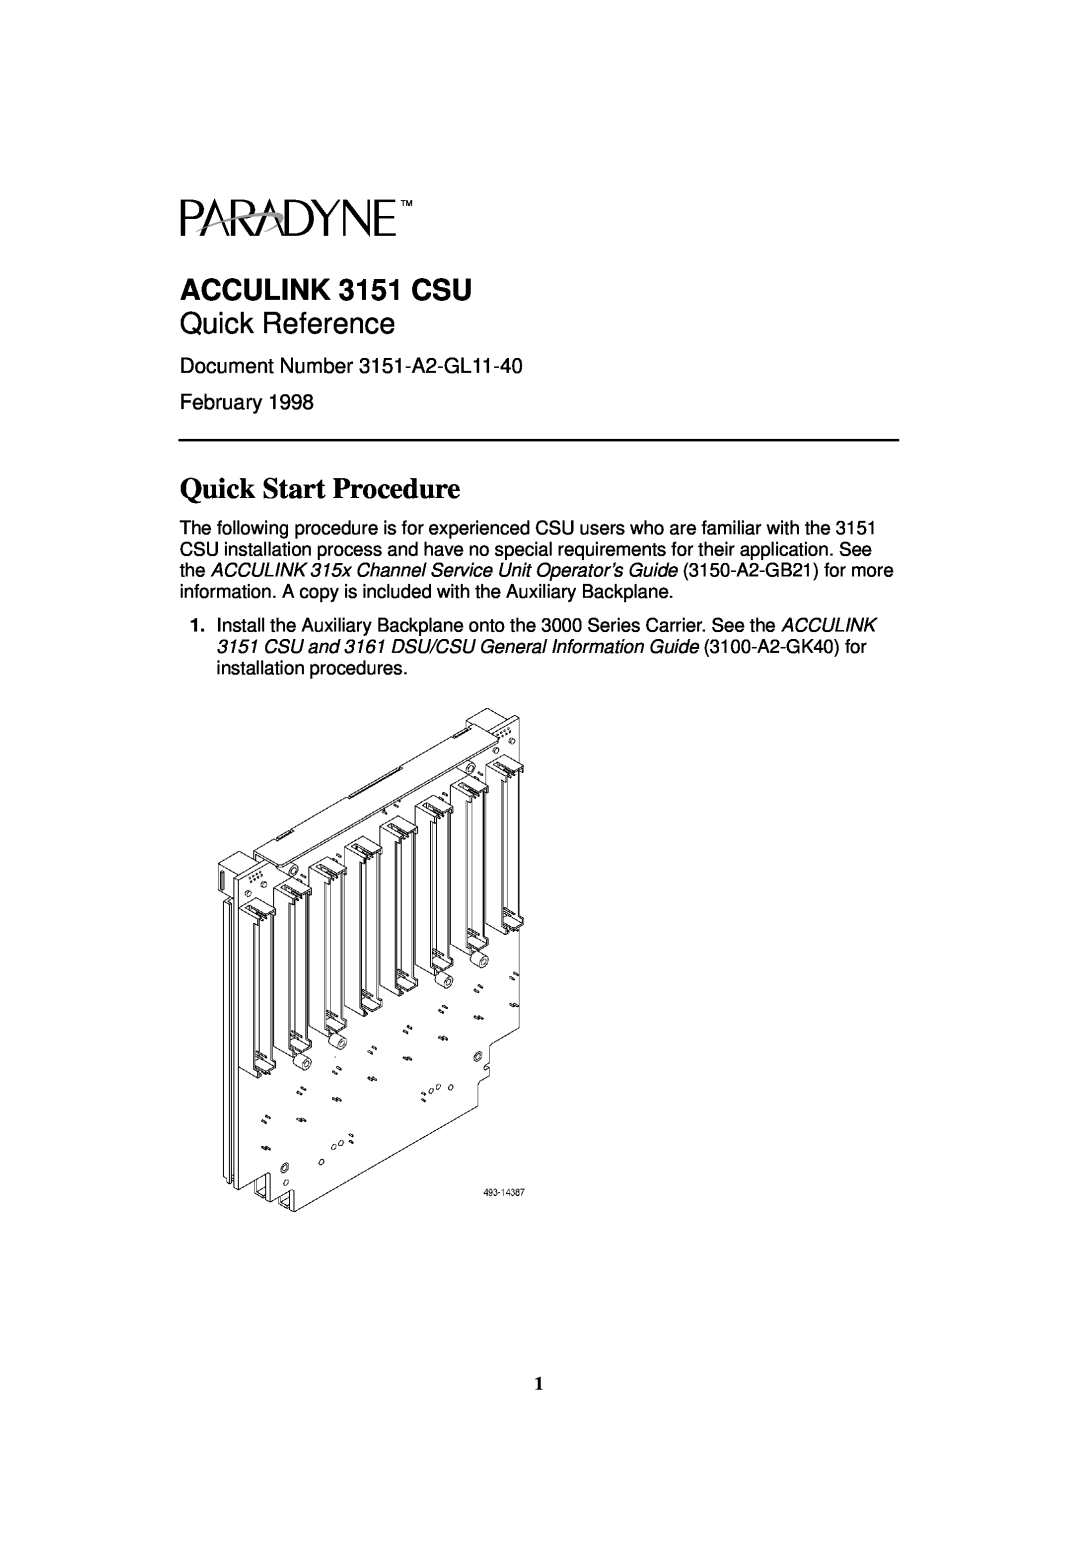 Paradyne manual Quick Start Procedure, ACCULINK 3151 CSU, Quick Reference, Document Number 3151-A2-GL11-40 February 